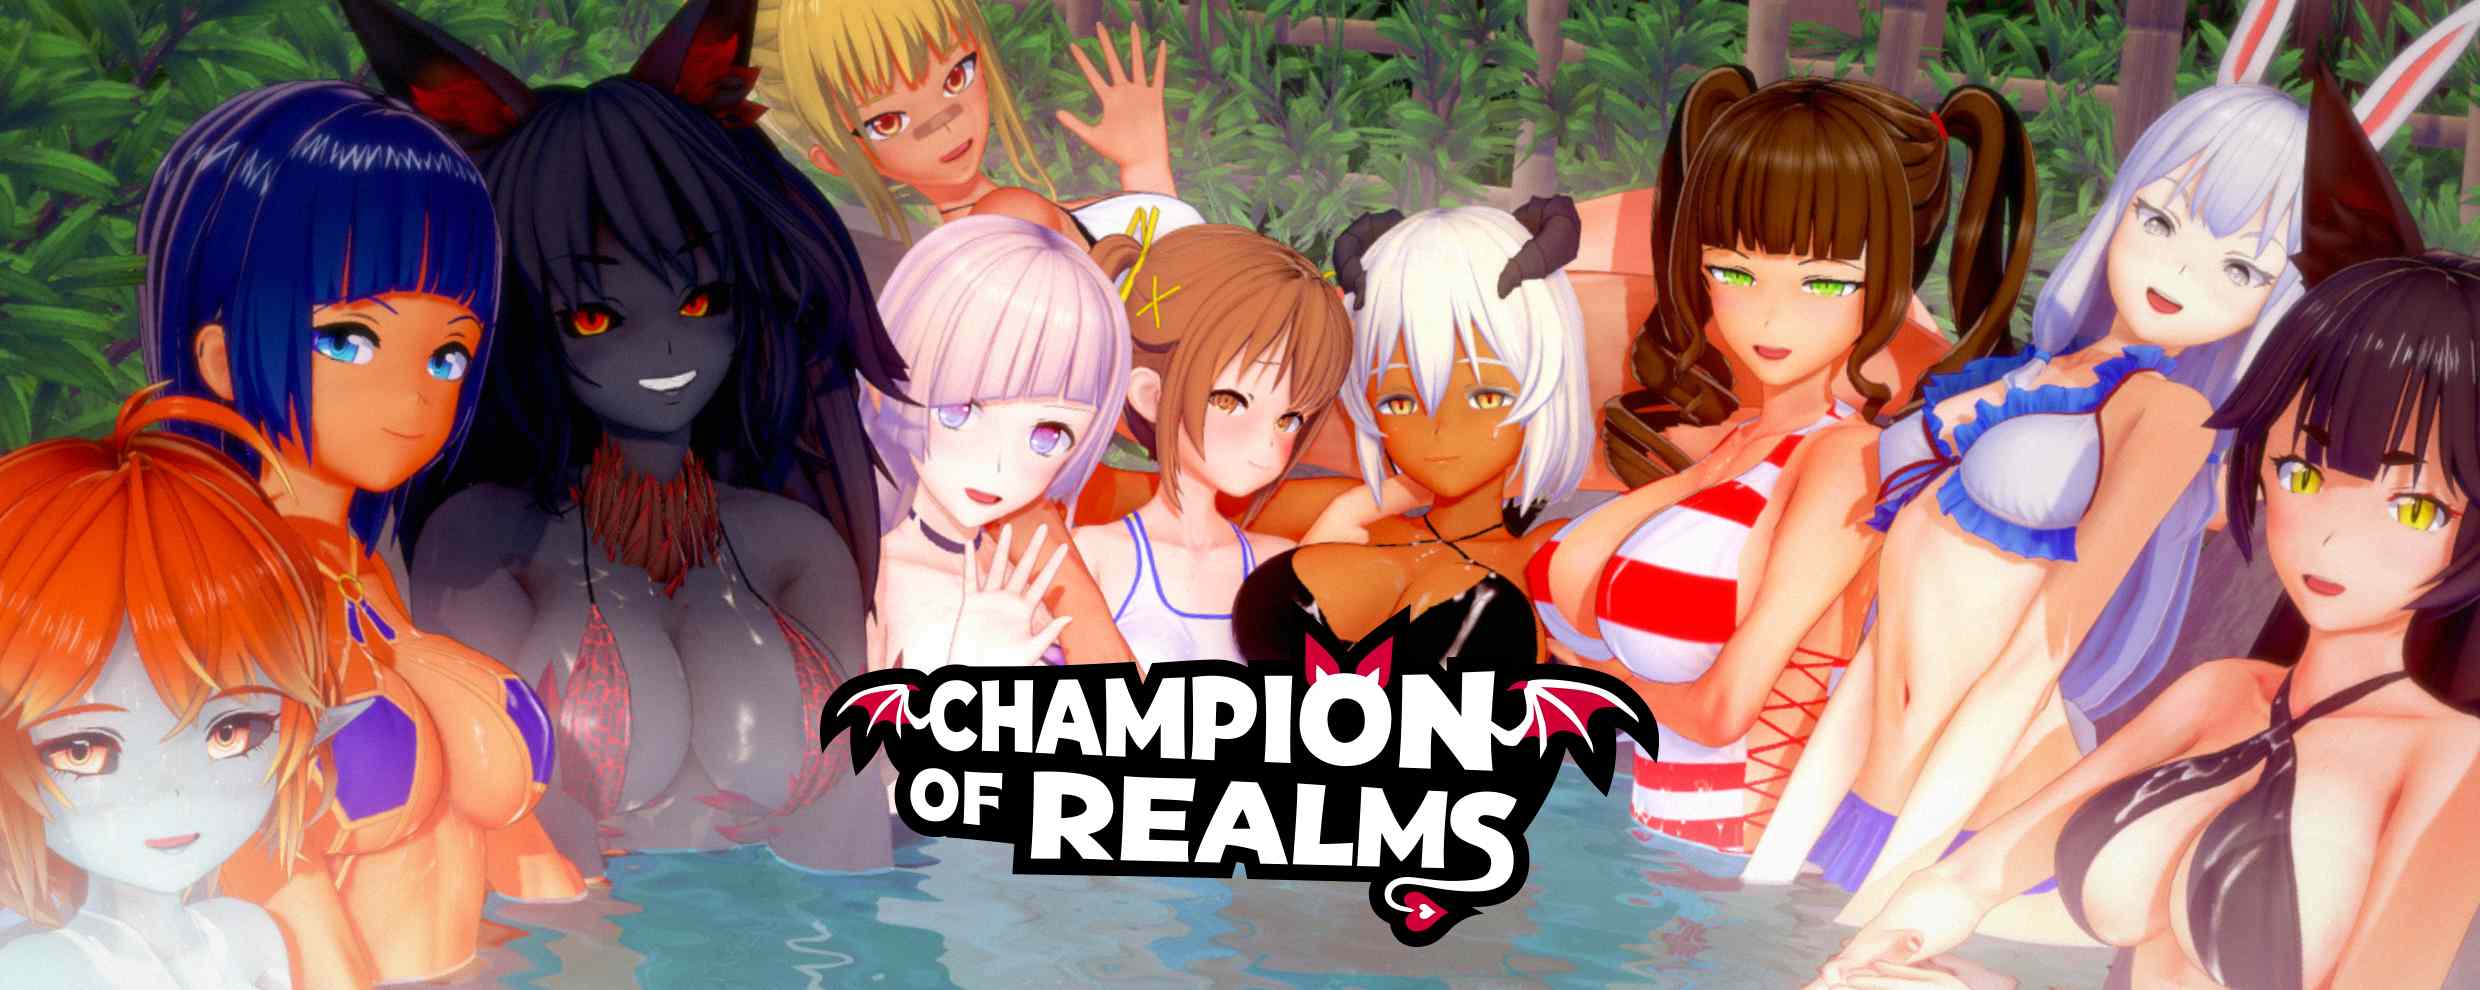 Champion of Realms [Zimon] Adult xxx Game Download